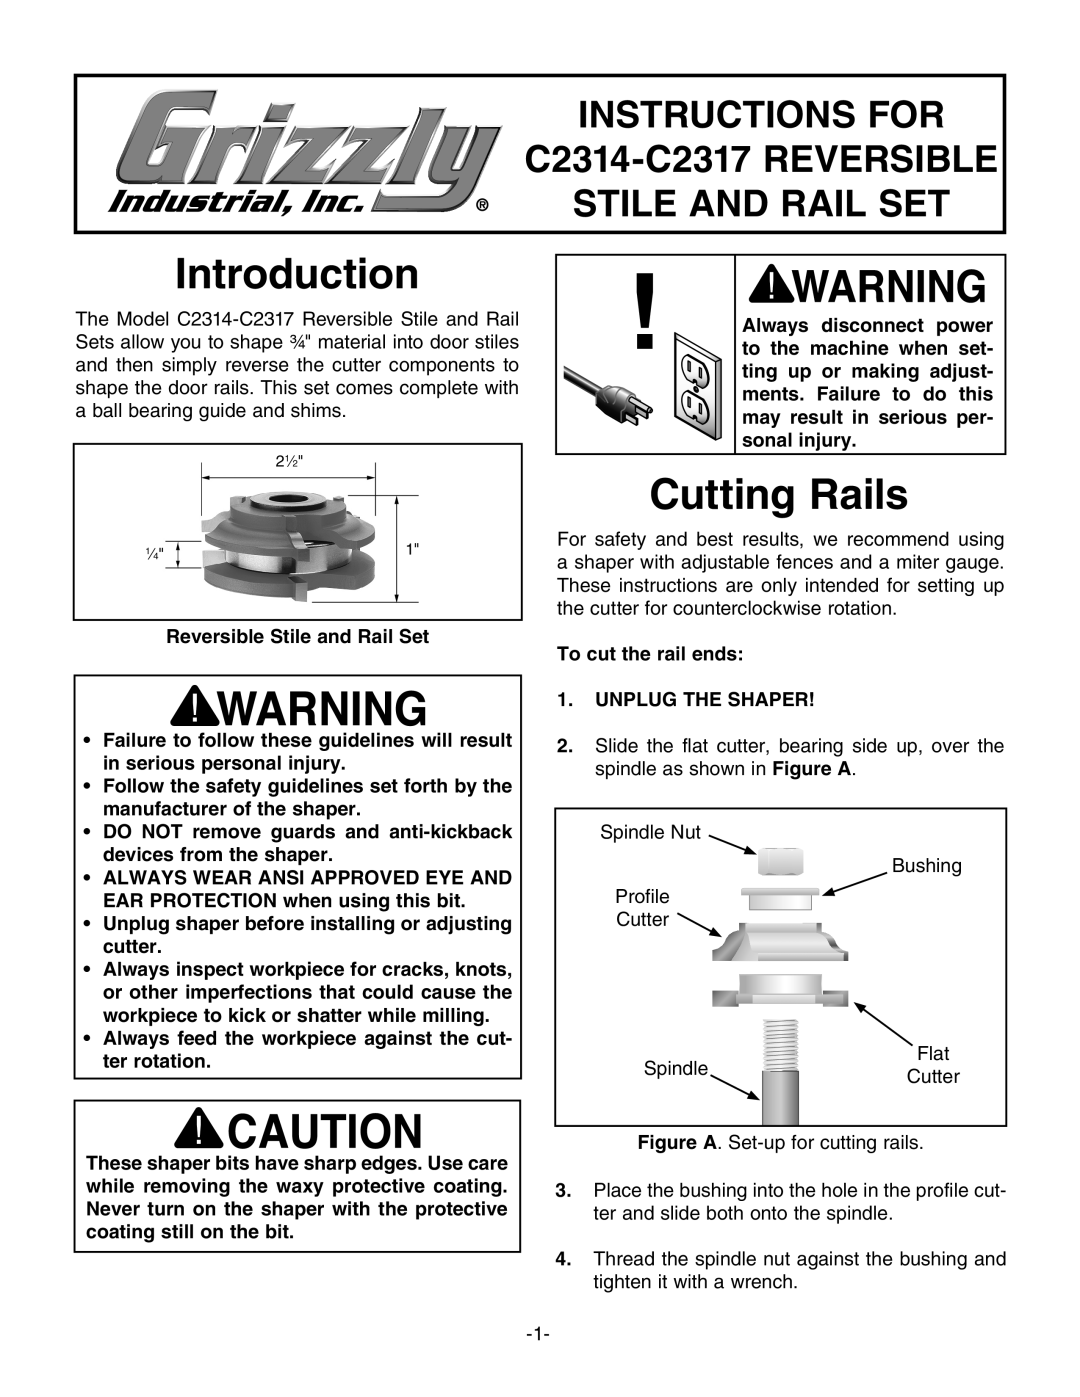 Grizzly manual Introduction, Cutting Rails, Instructions For, Stile And Rail Set, C2314-C2317 REVERSIBLE 